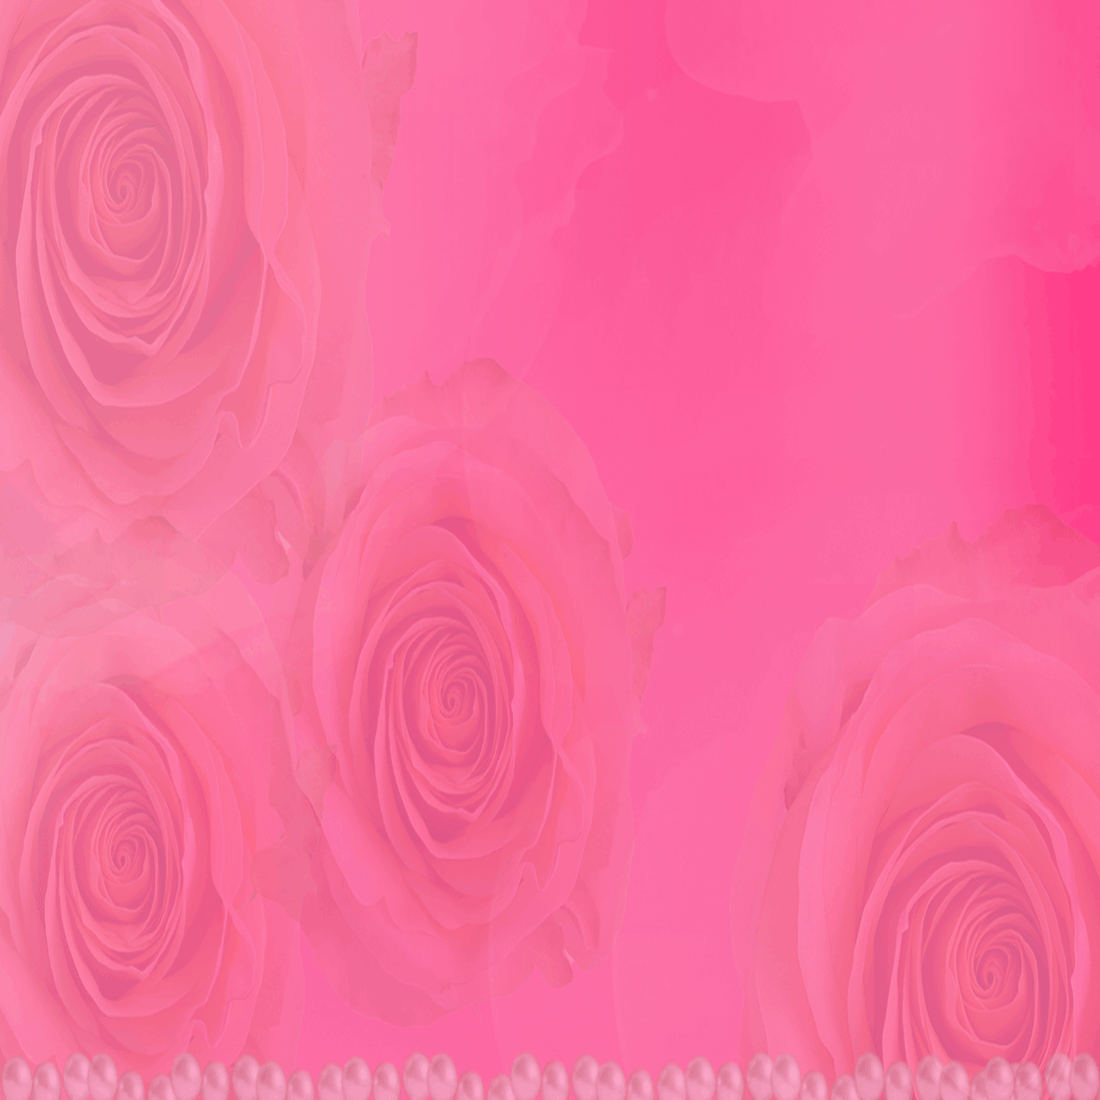 Rose-Background-Cosmetic-abstract-product cover image.